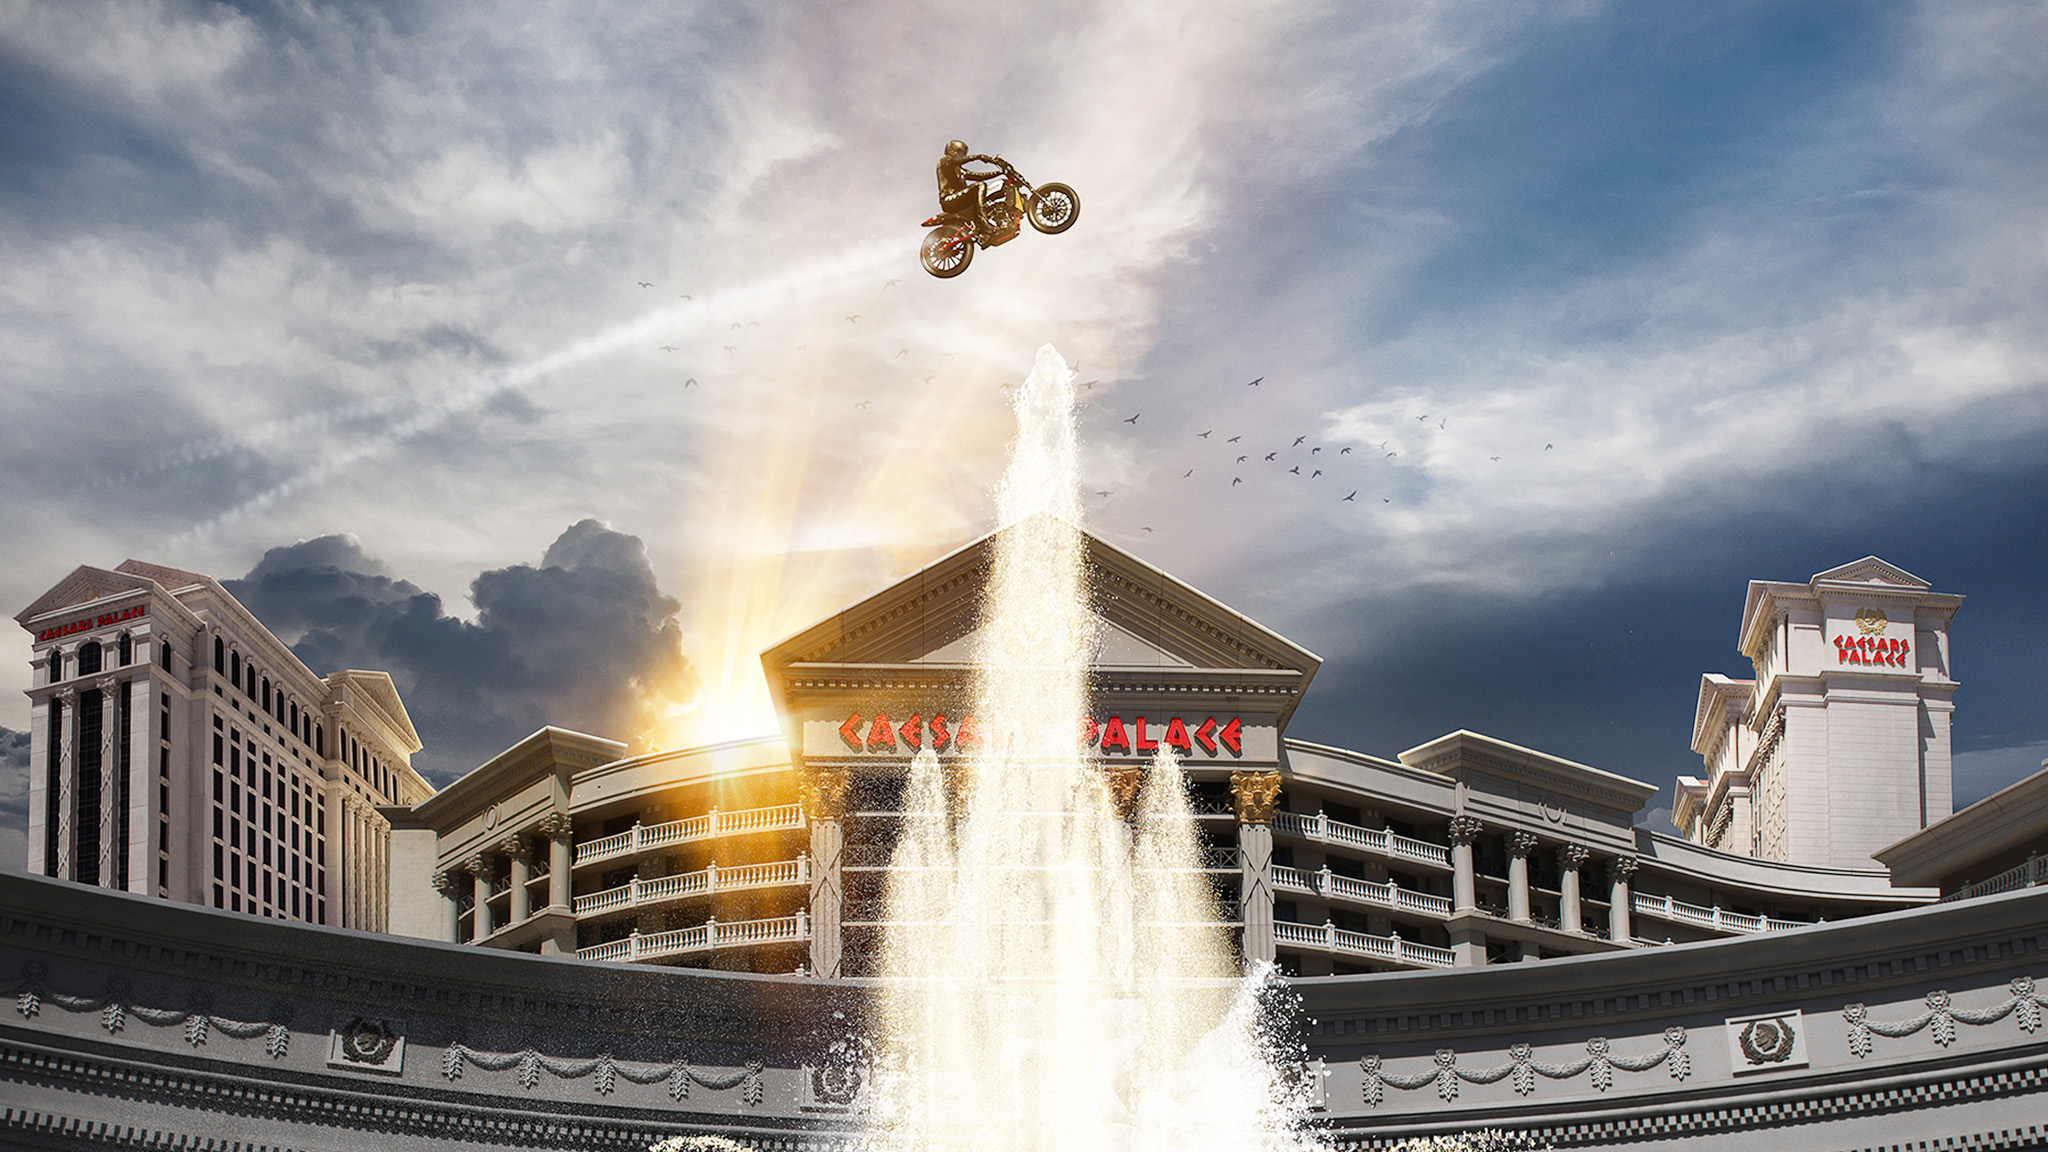 Make Your Own History In Las Vegas With Up To 30% Off - Evel Live History Channel , HD Wallpaper & Backgrounds